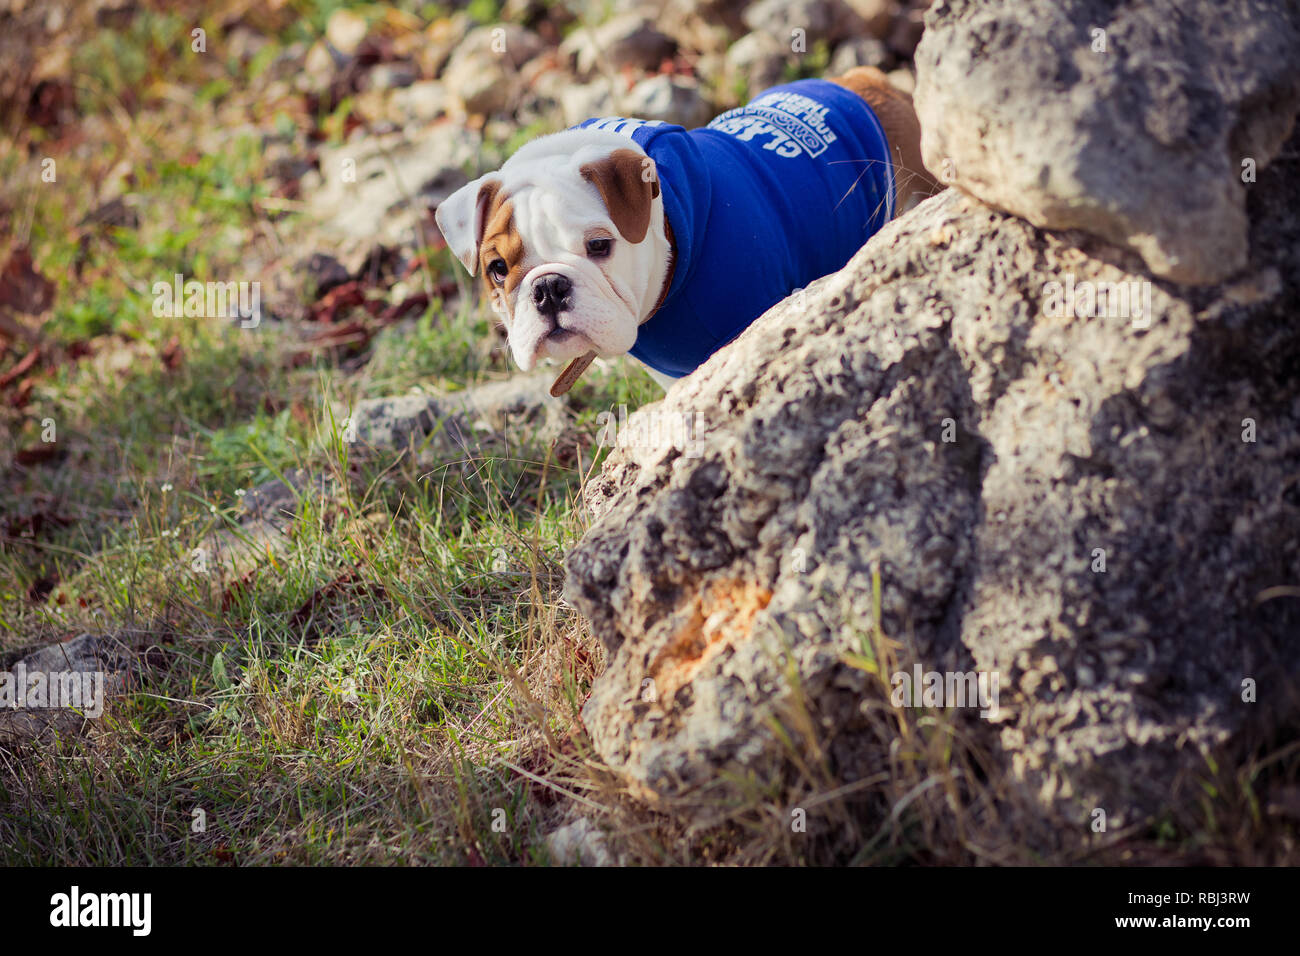 English puppy Bulldog Dog at the forest summer time. Stock Photo